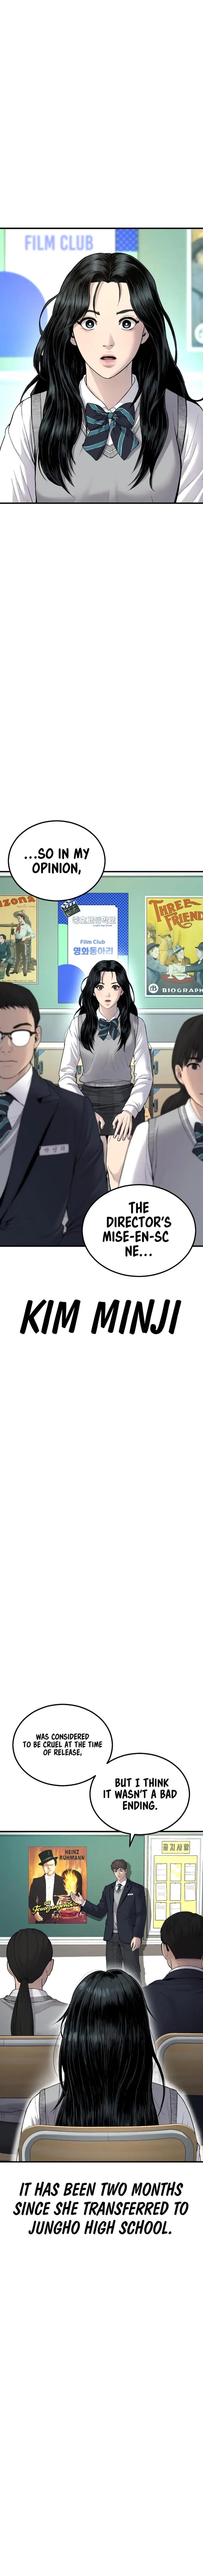 Manager Kim - Page 1